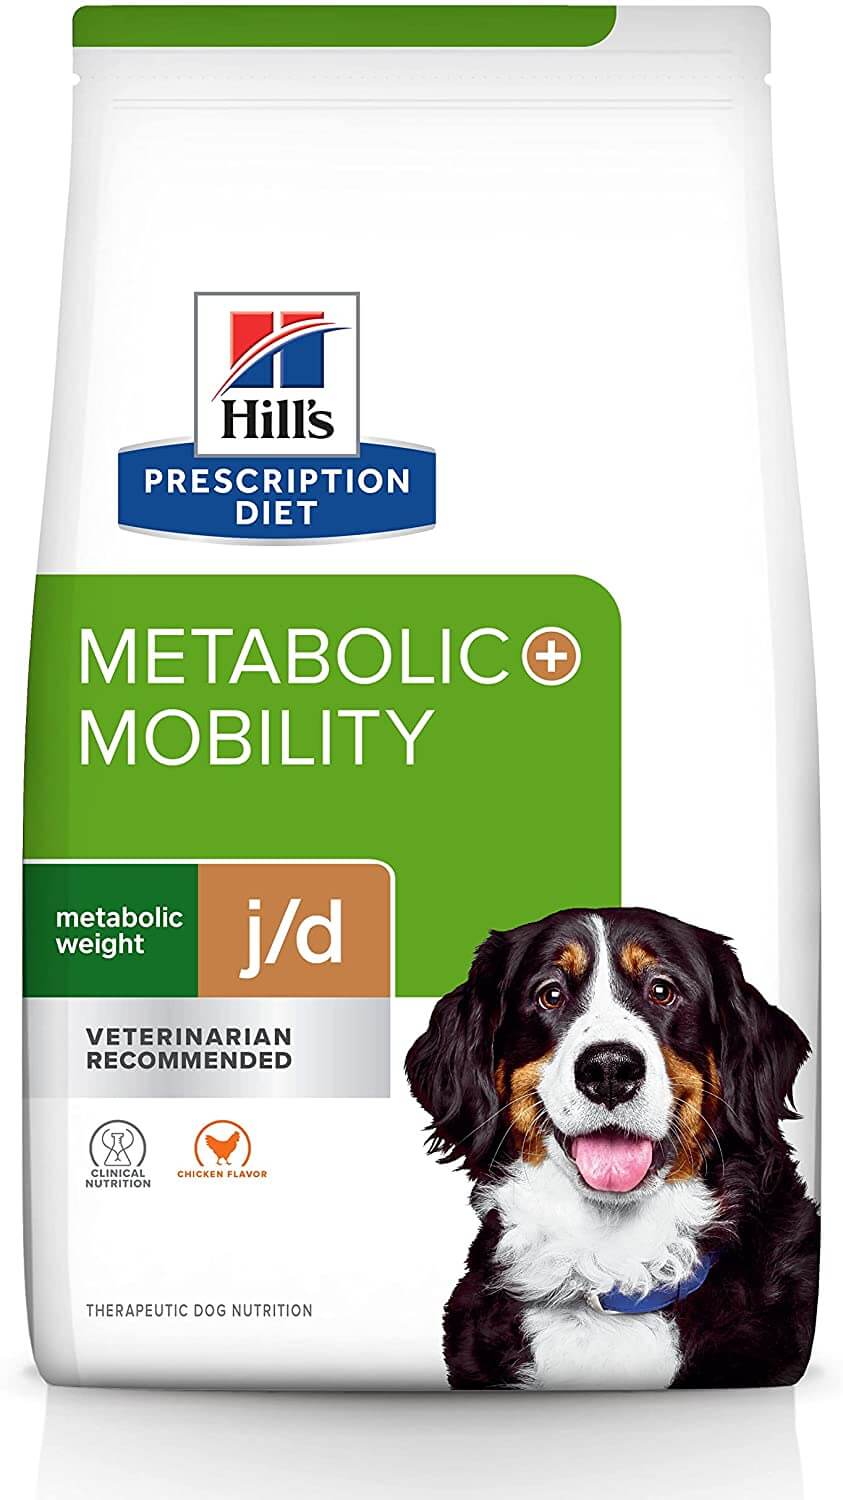 Hill's Prescription Diet Metabolic - Mobility, Weight - j-d Joint Care Dry Dog Food